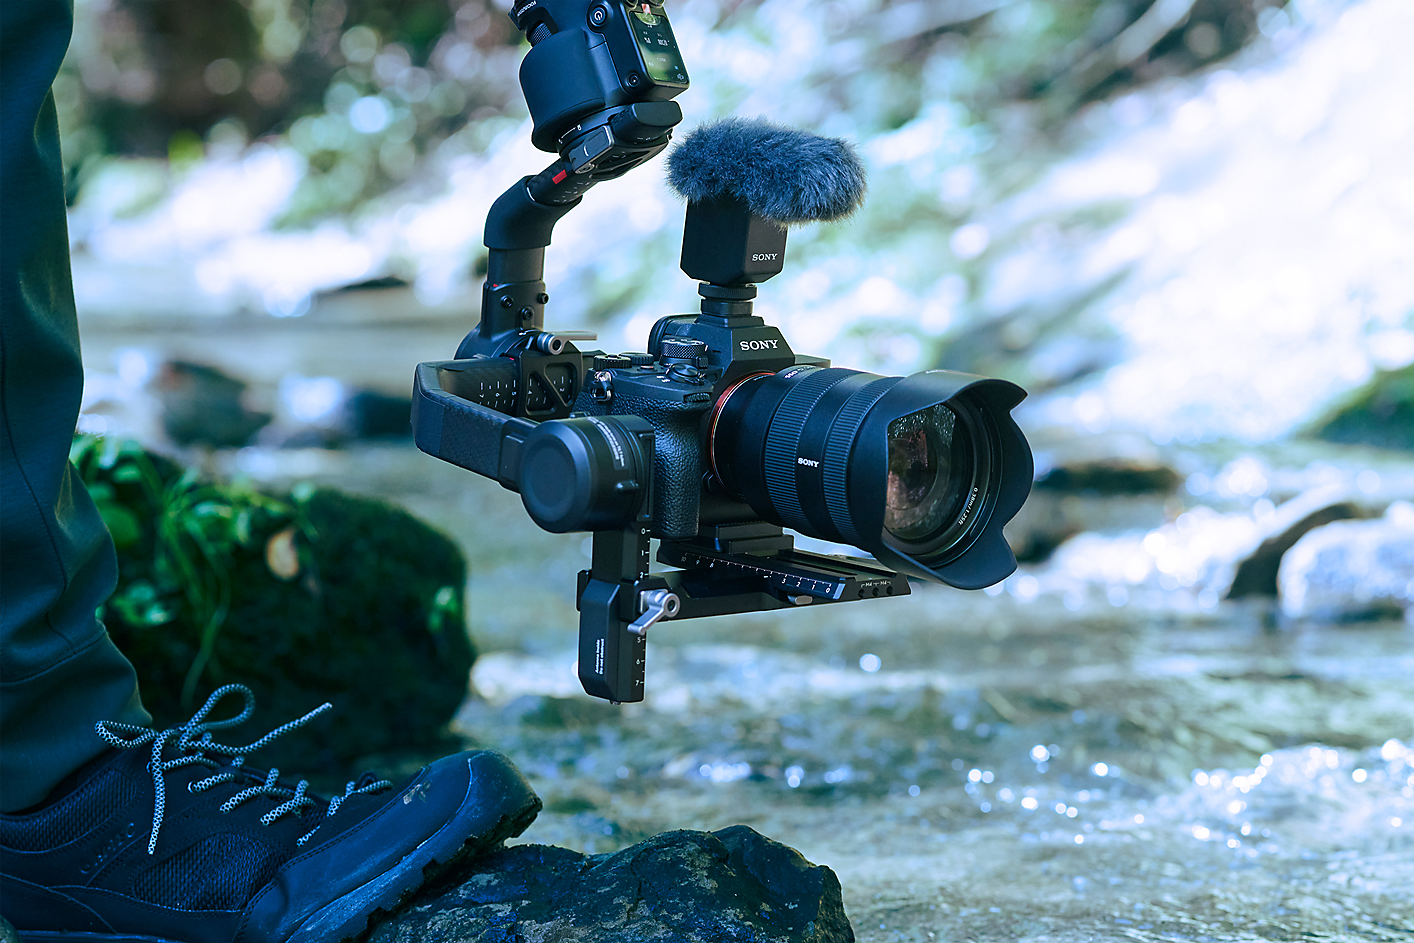 Image of a person using a camera mounted on a gimbal to collect sound near small river.